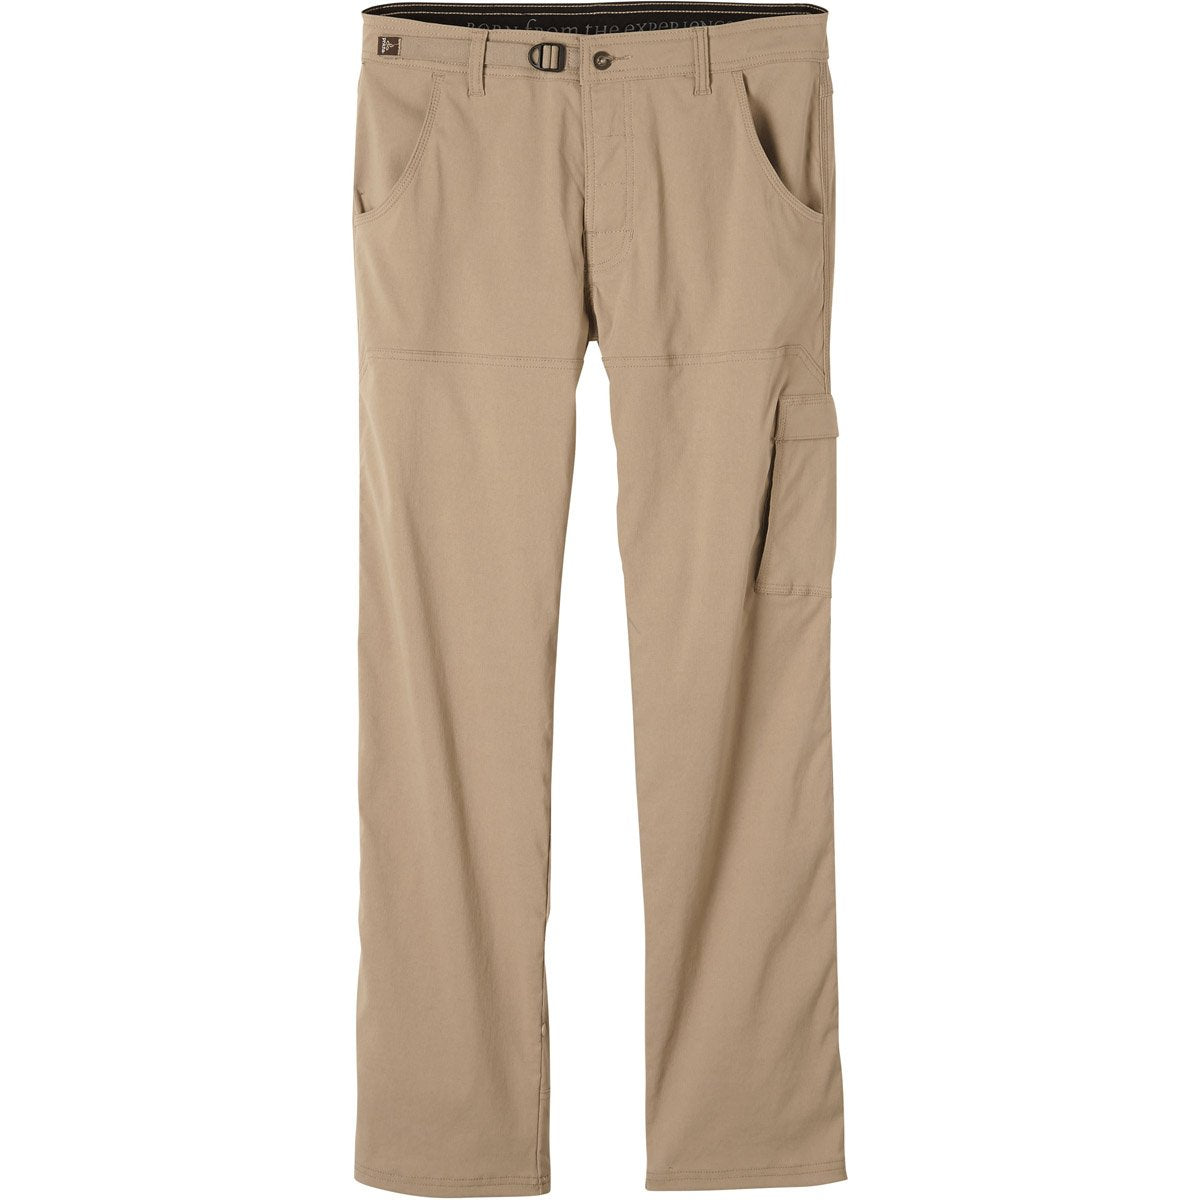 Dry Pants Package - Zion Outfitter